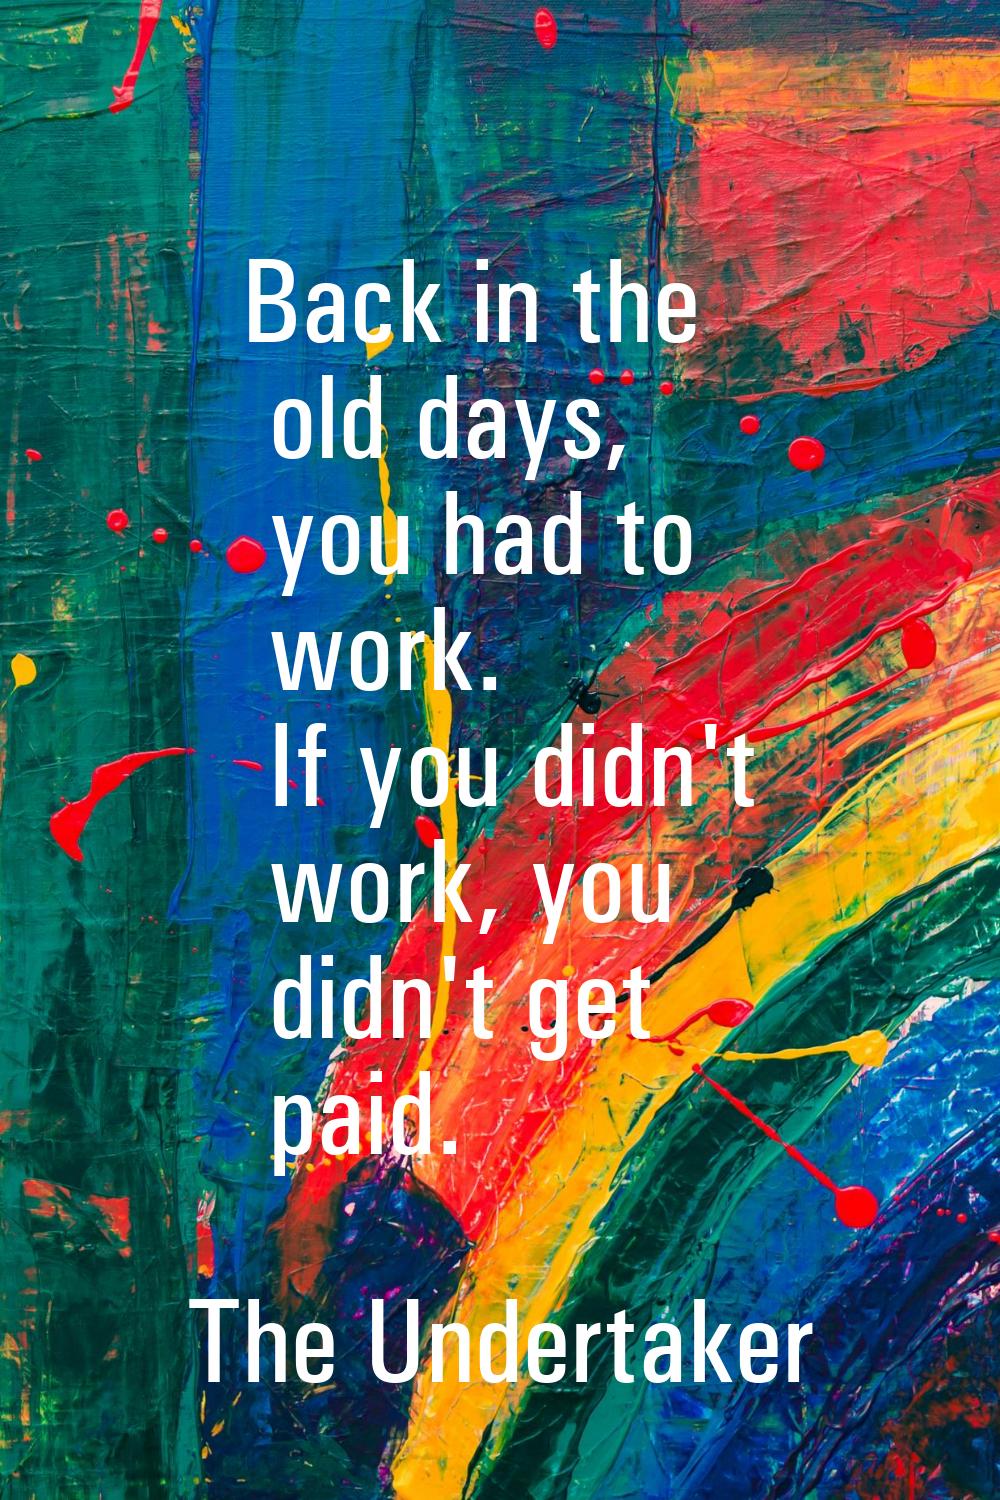 Back in the old days, you had to work. If you didn't work, you didn't get paid.